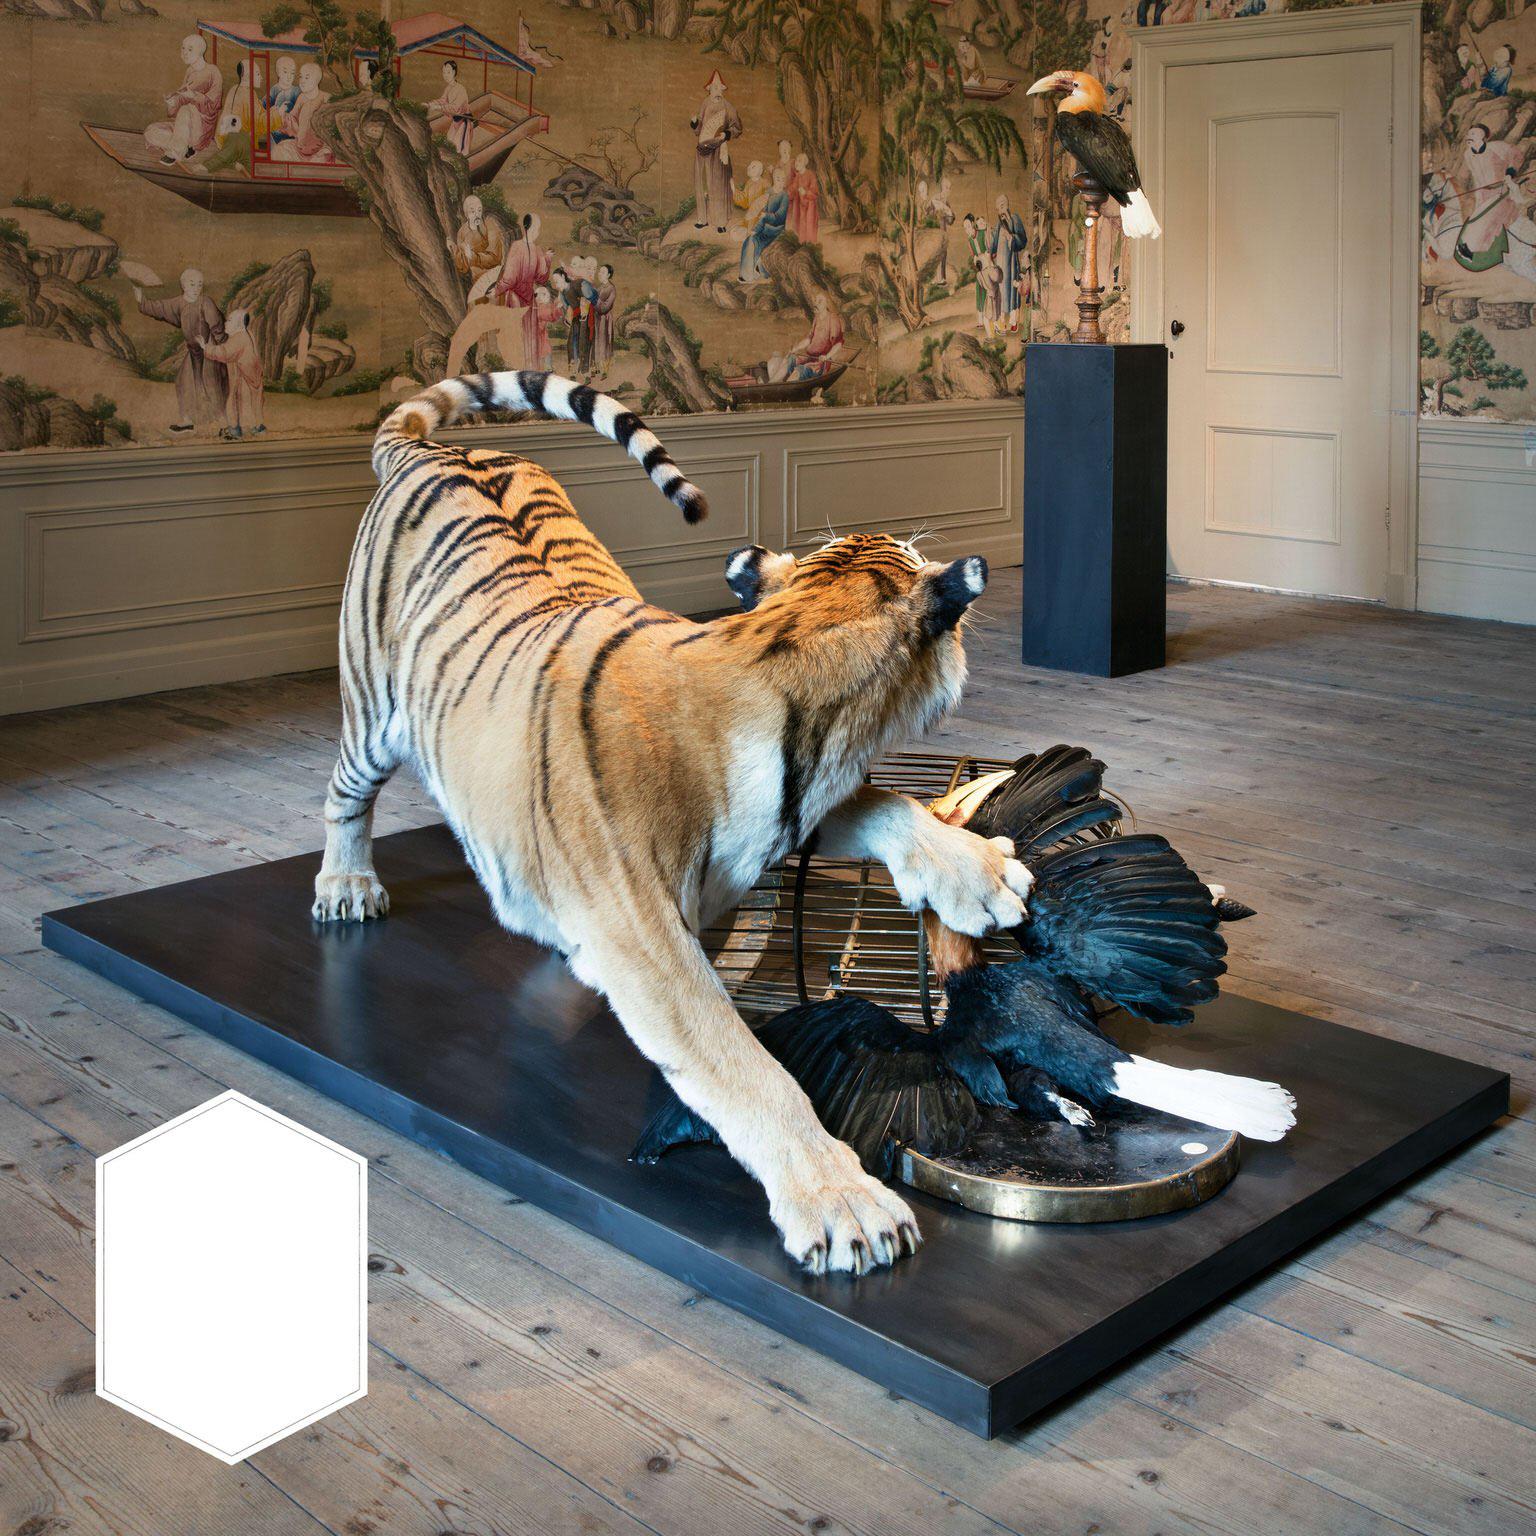 Tiger and Hornbill from Exhibition Tier at Moa by Sinke & Van Tongeren 1